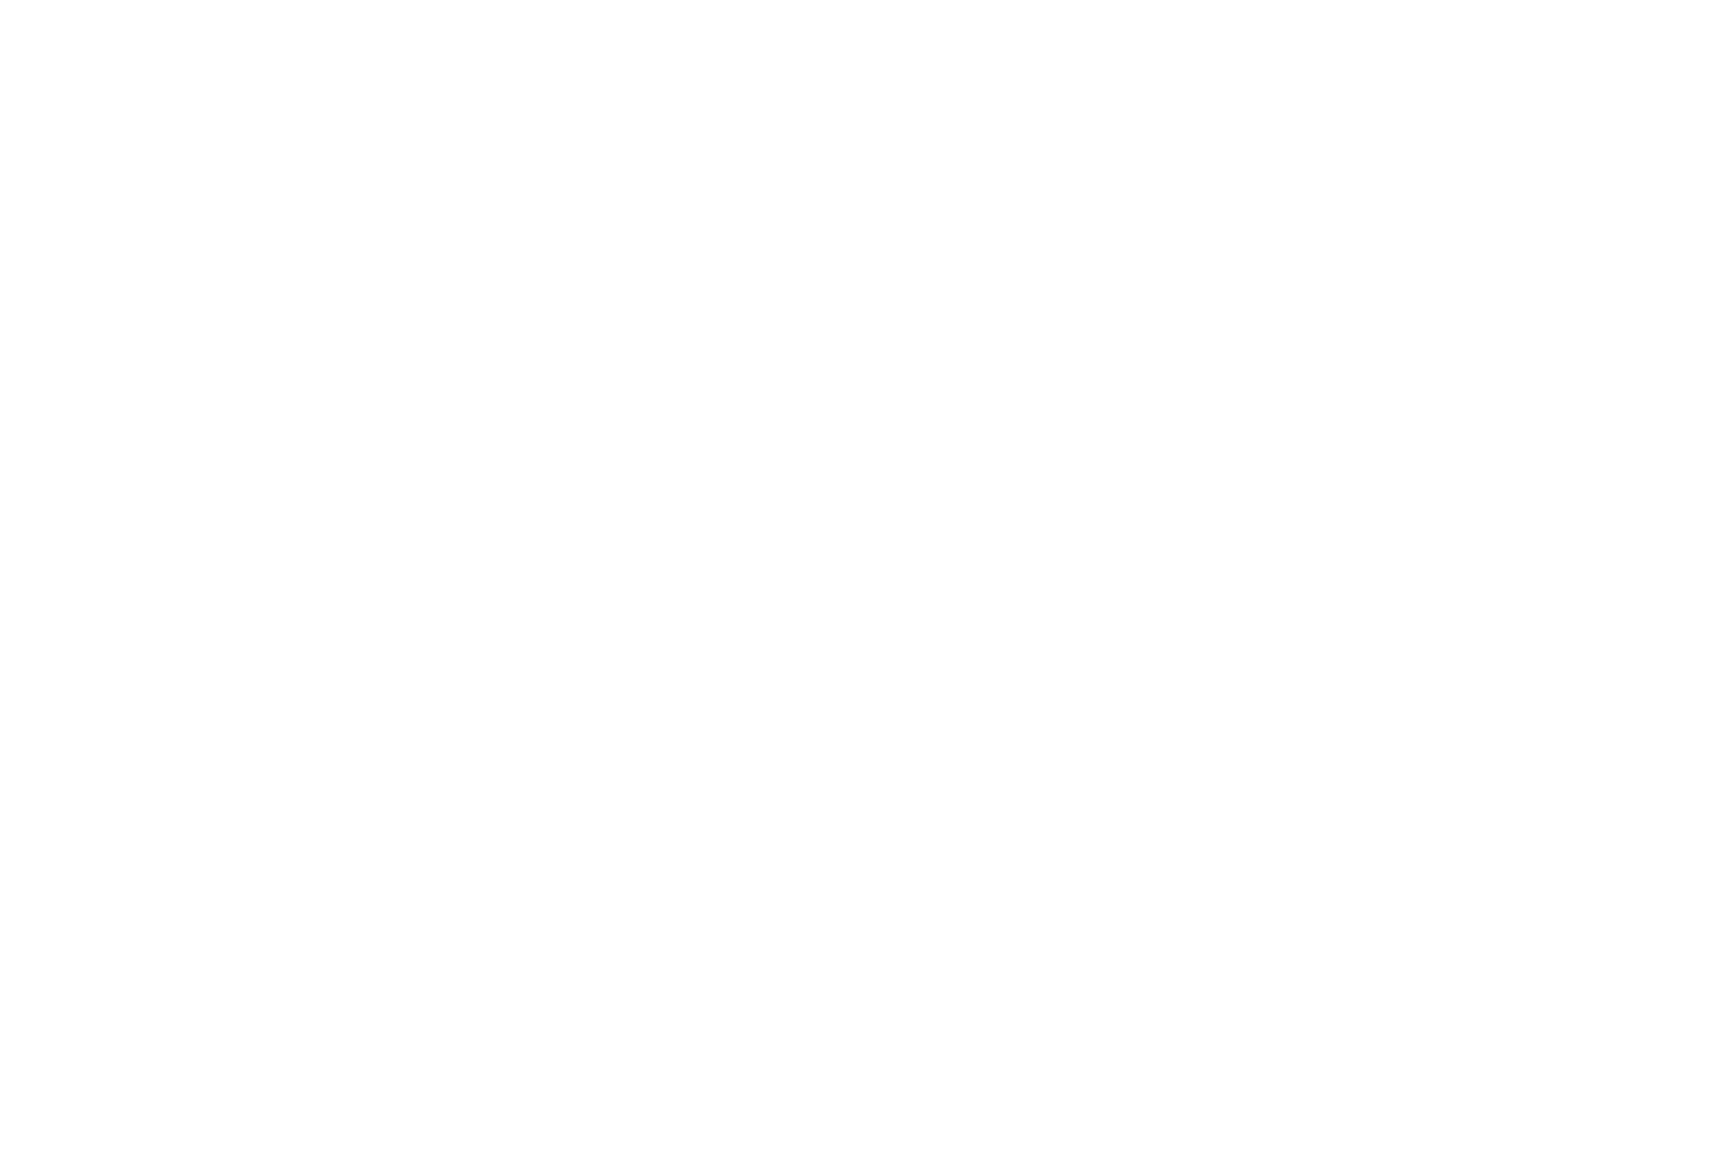 Laurel for Official Selection at Human Rights Film Festival BARCELONA Paris NYC awarded to 'L'estoc' in 2017